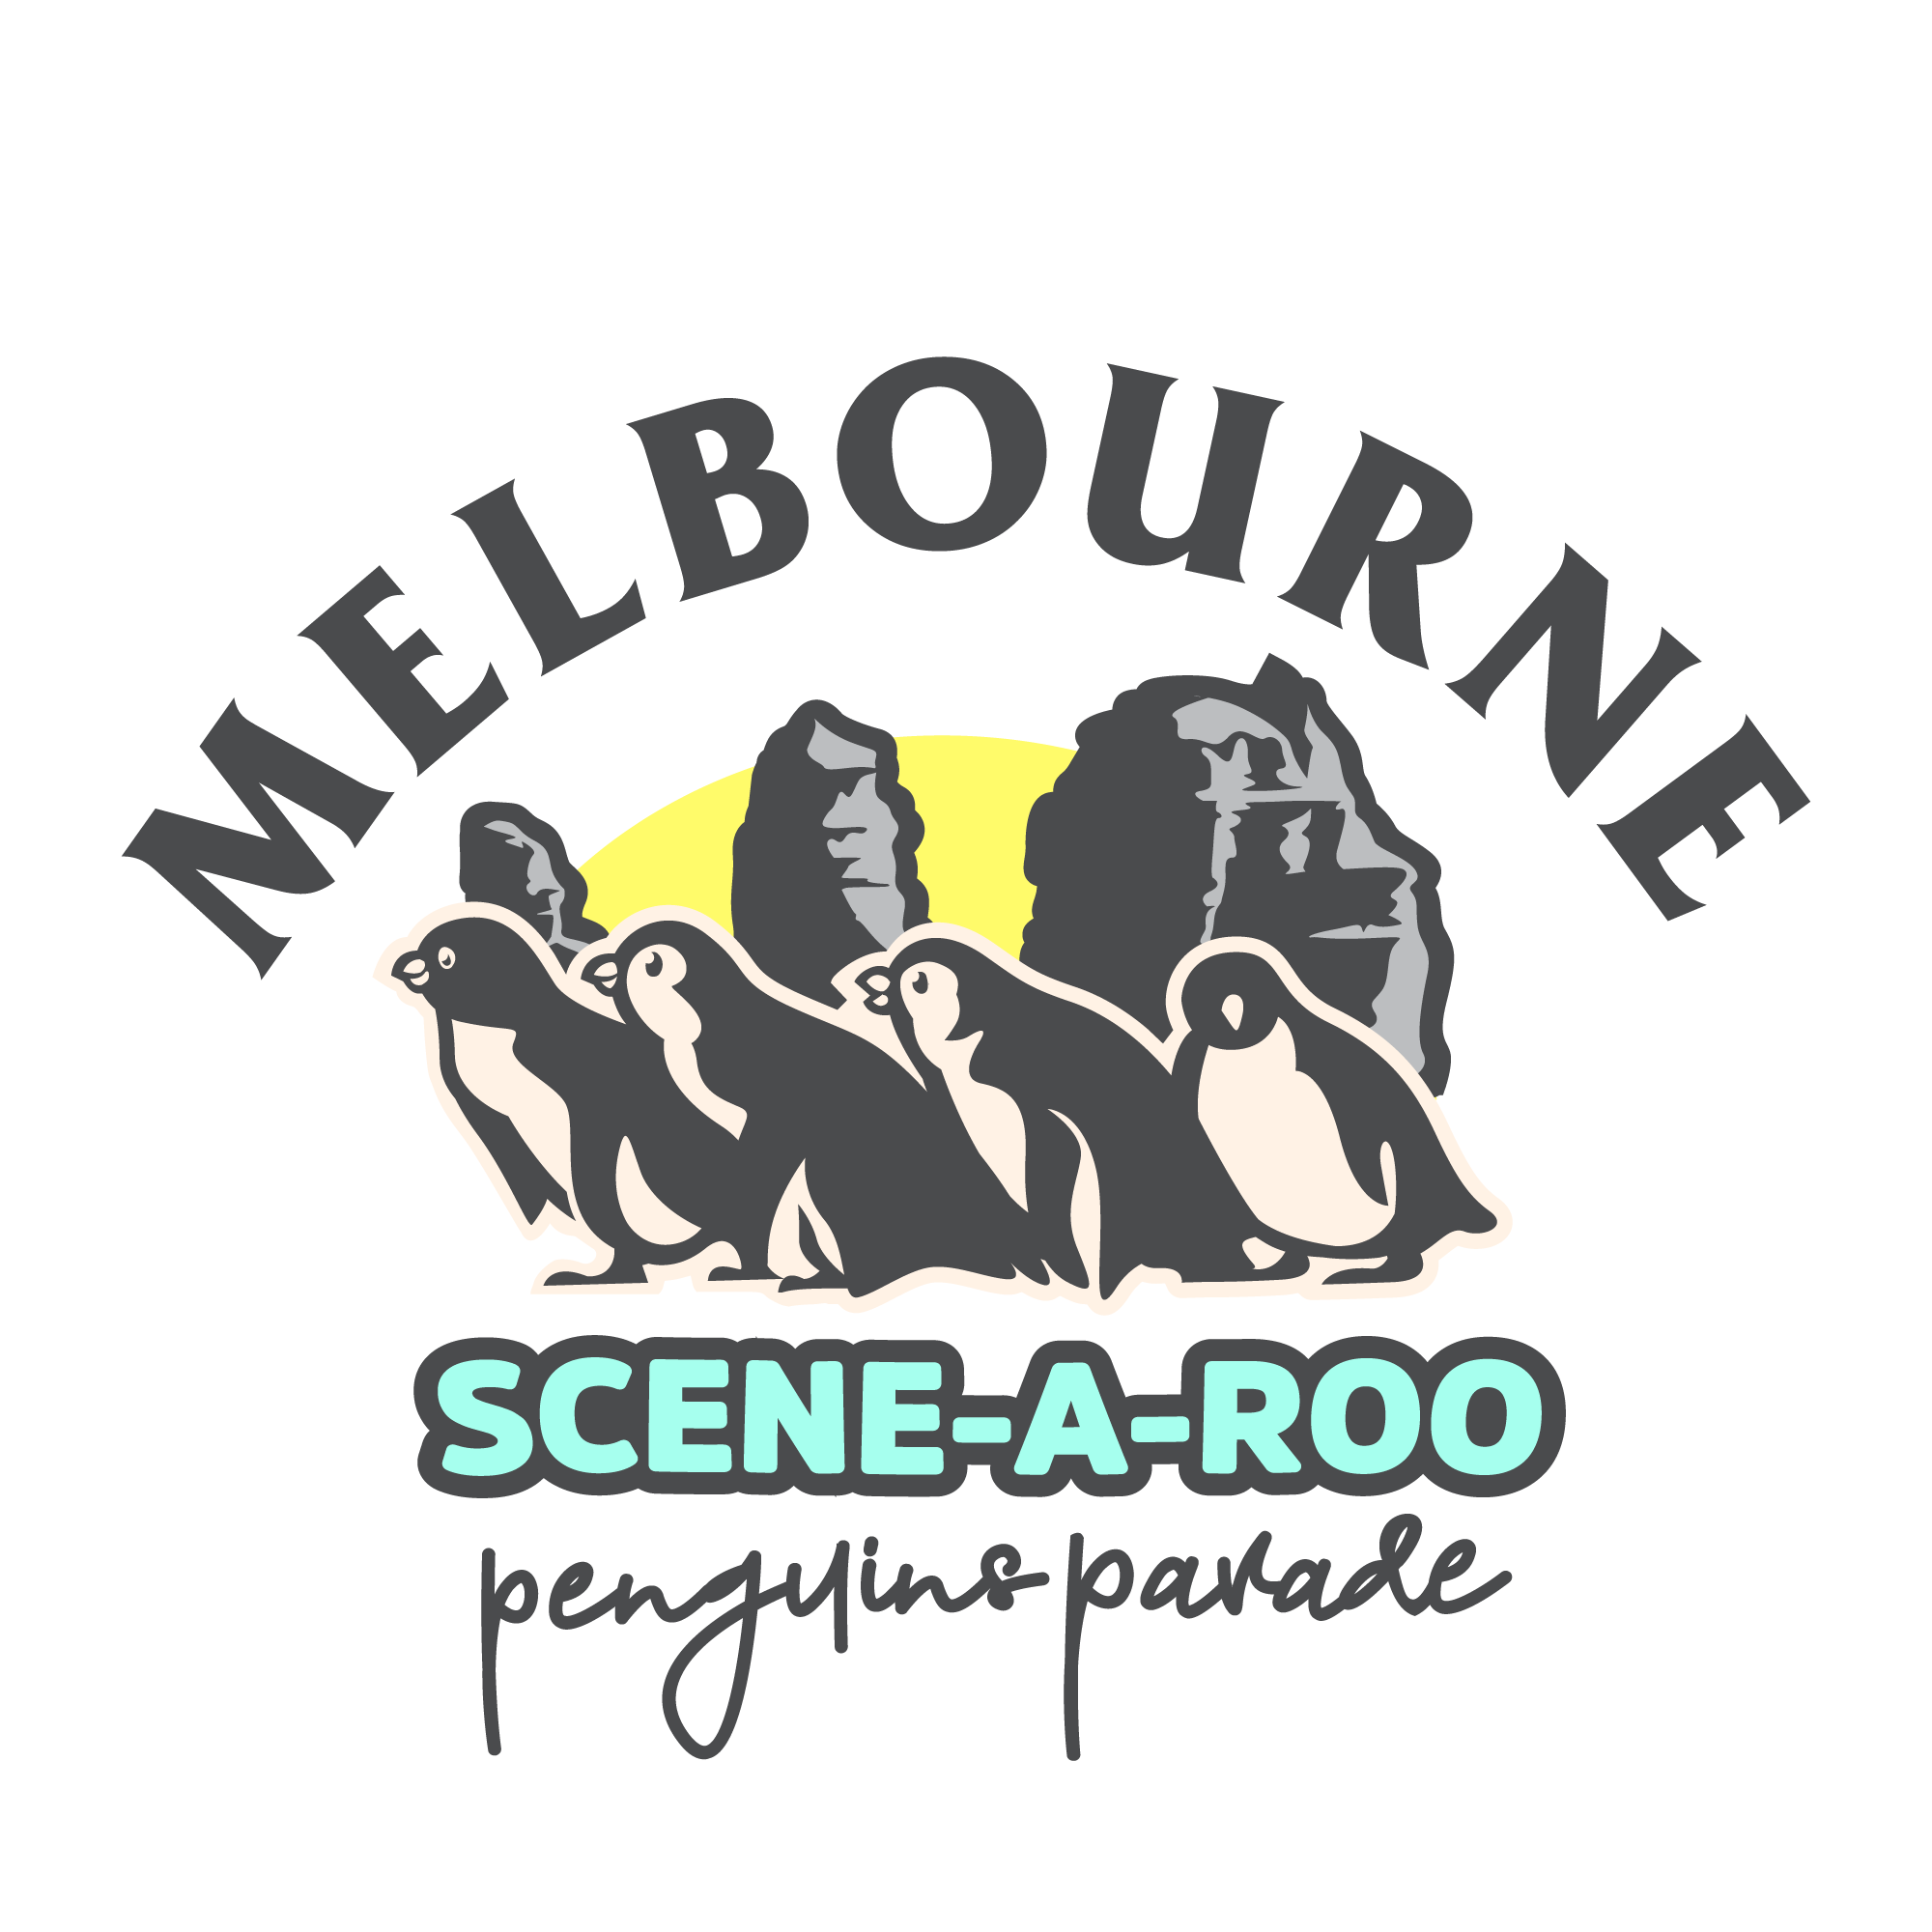 Go to Penguin parade tour with Scene-A-Roo